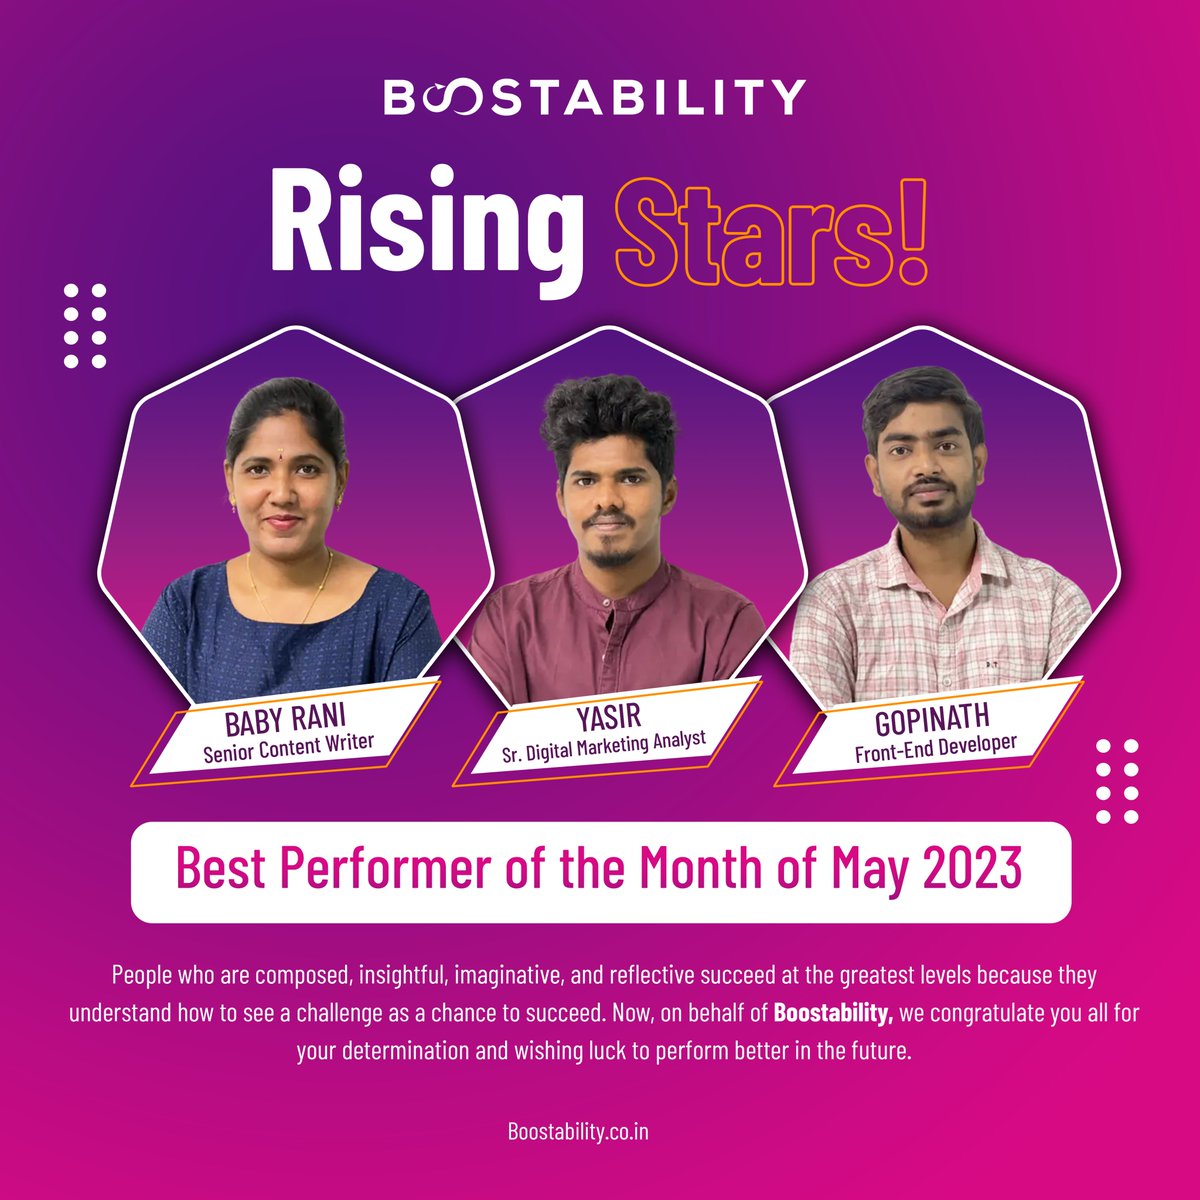 Every single employee will be a great contributor to the firm's success.  We are amazed by how you sustain your performance while taking on versatile works. Your standard performance is a motivation to all. Keep up the great work! You guys are the superstars.

#BestPerformer